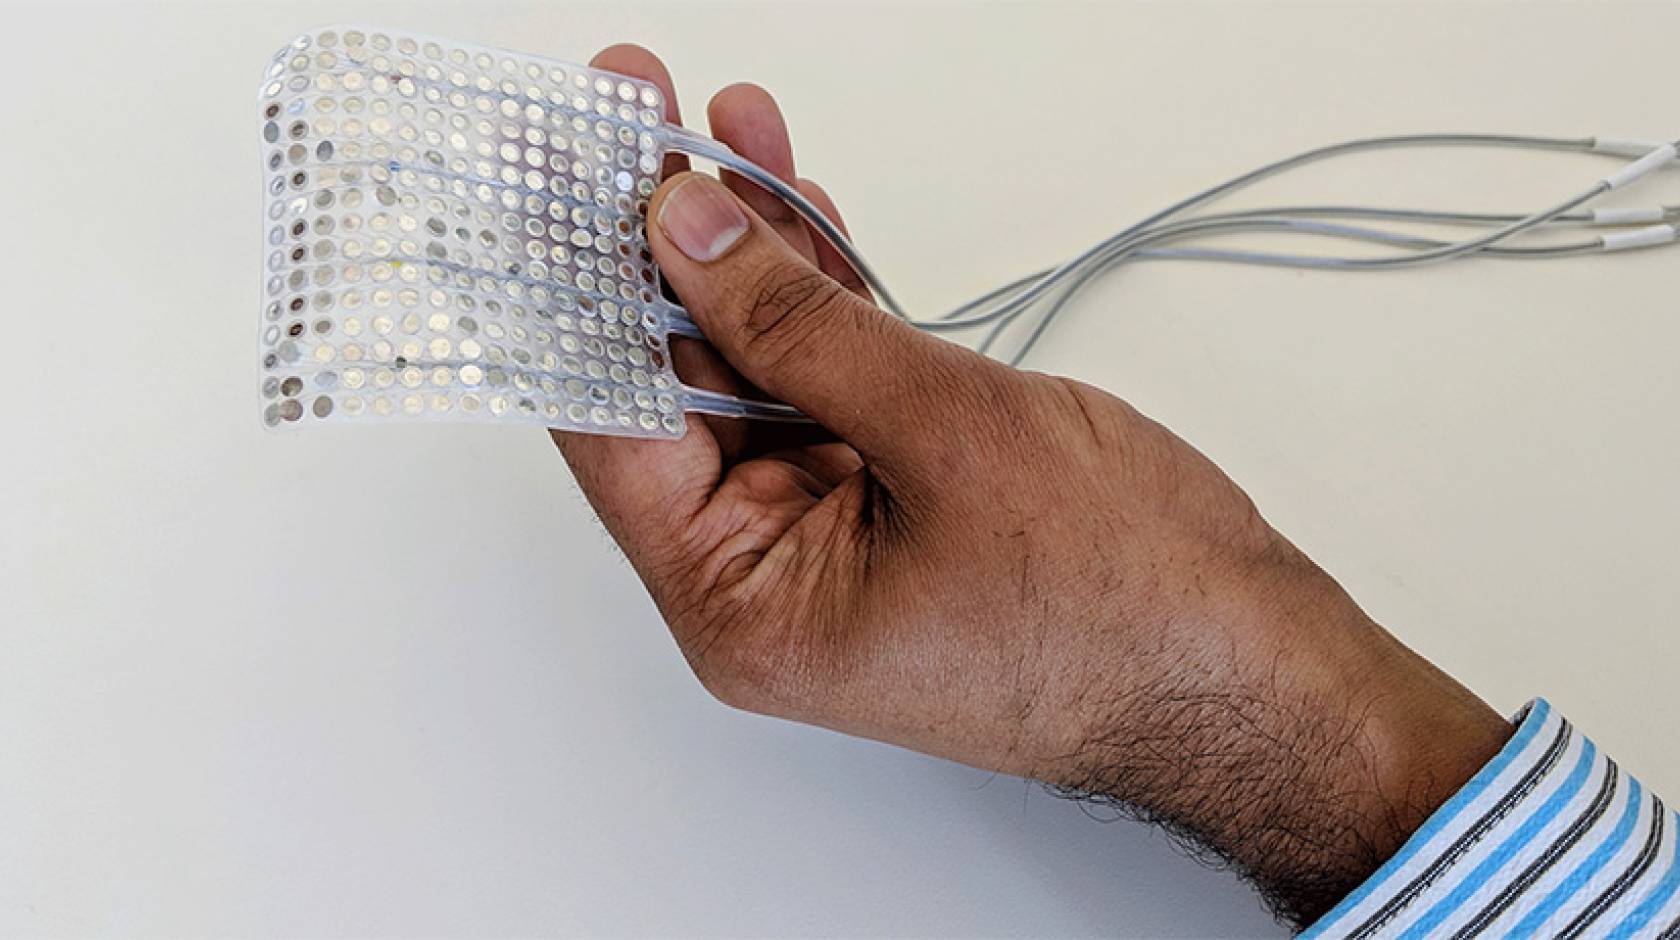 Hand holding the intracranial electrodes of the type used to record brain activity.